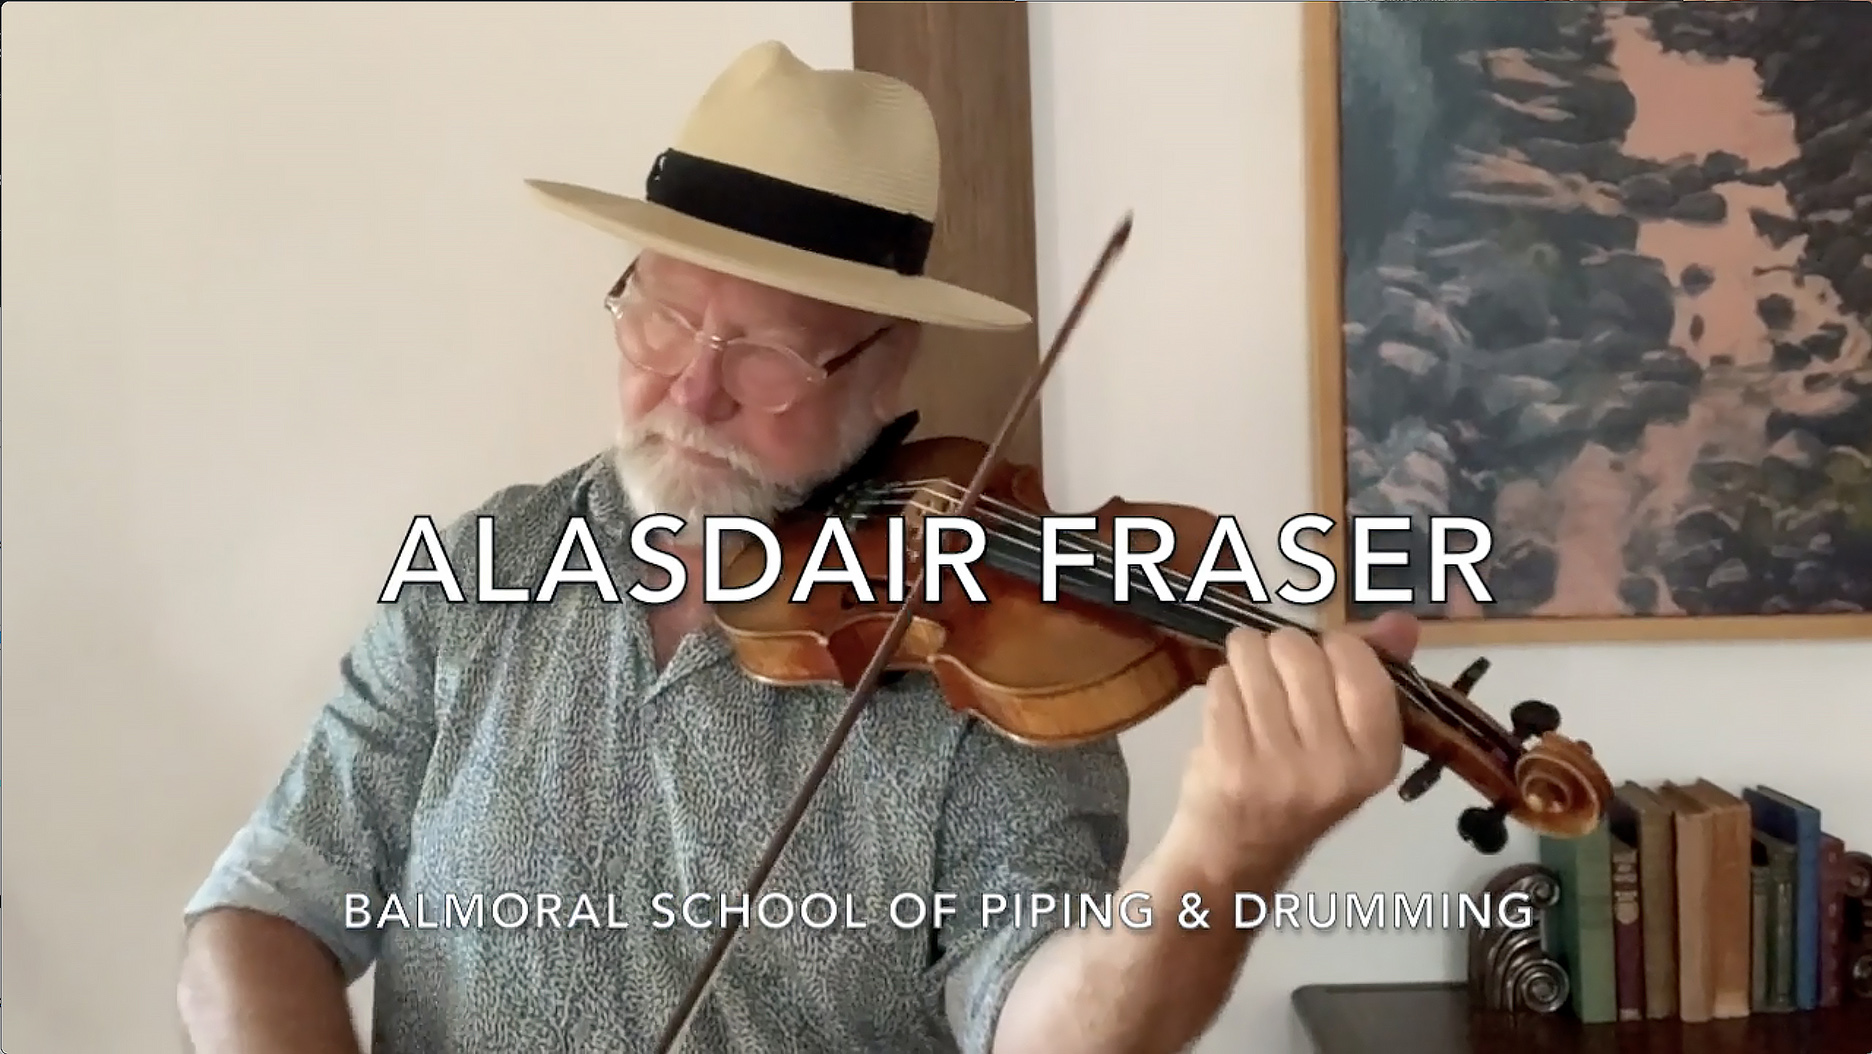 A concert with Scottish fiddle master Alasdair Fraser will be presented as a YouTube Premiere with Live Chat on Saturday, Nov. 14 at 7:30pm EST